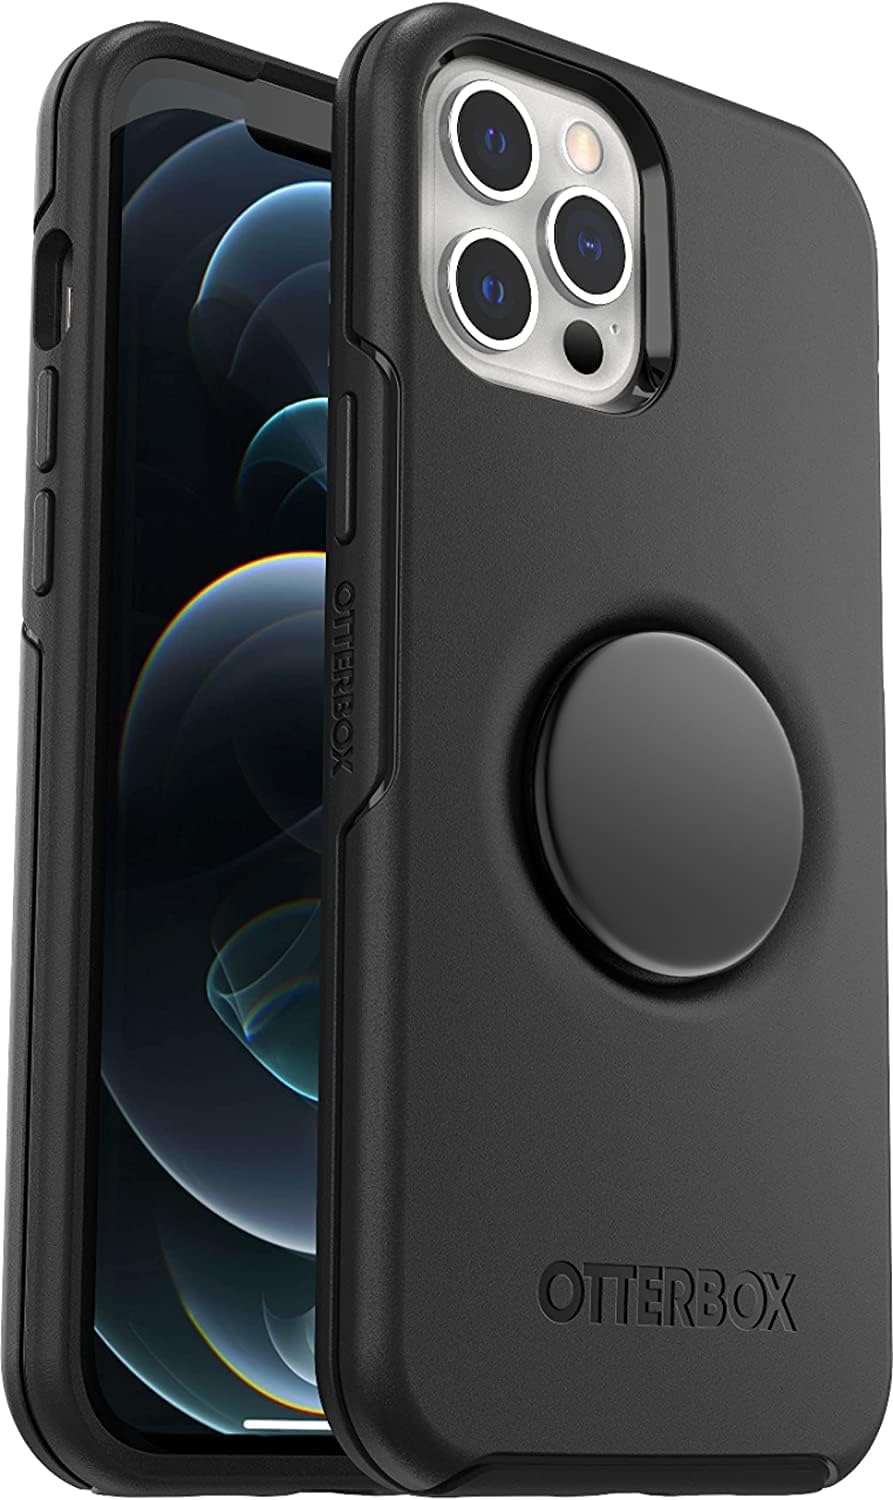 OtterBox Otter+Pop SYMMETRY SERIES Case for Apple iPhone 12/12 Pro - Black (Certified Refurbished)